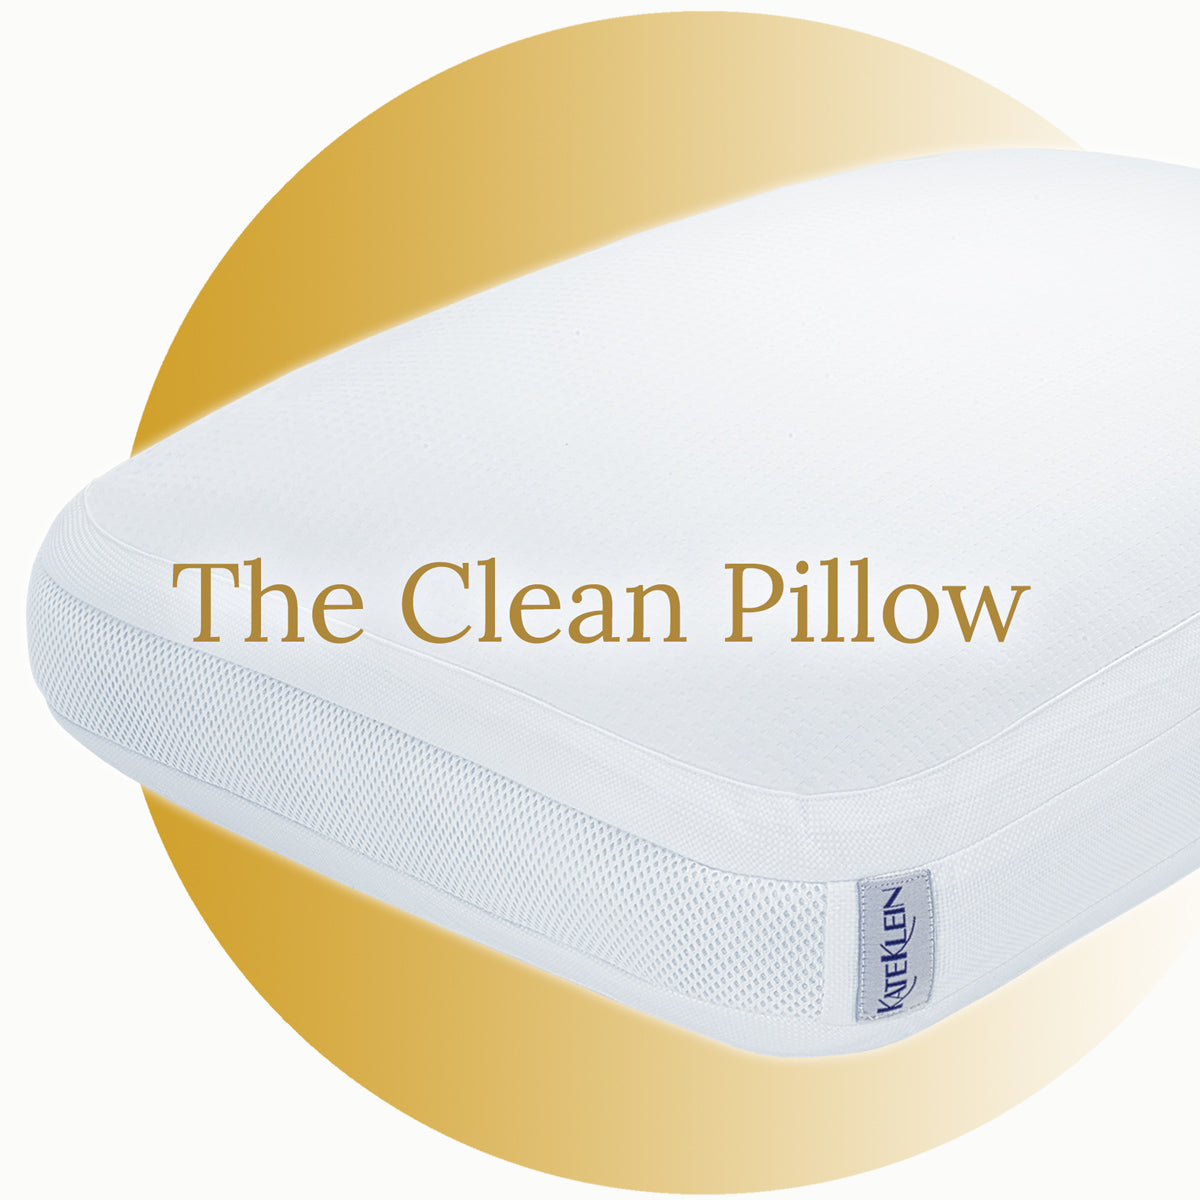 The Clean Pillow